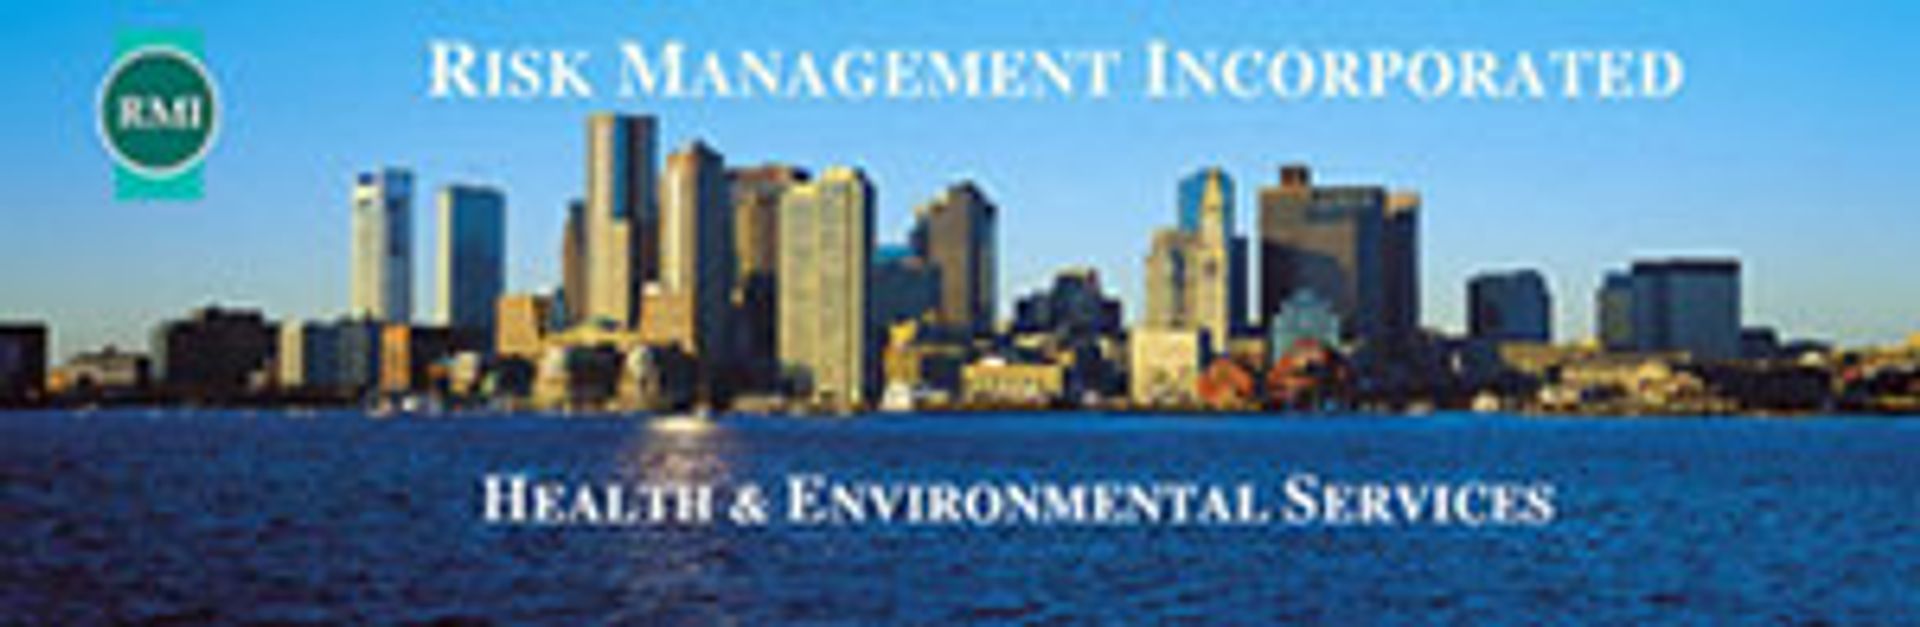 Risk Management Incorporated - Environmental Services - An Essential Service